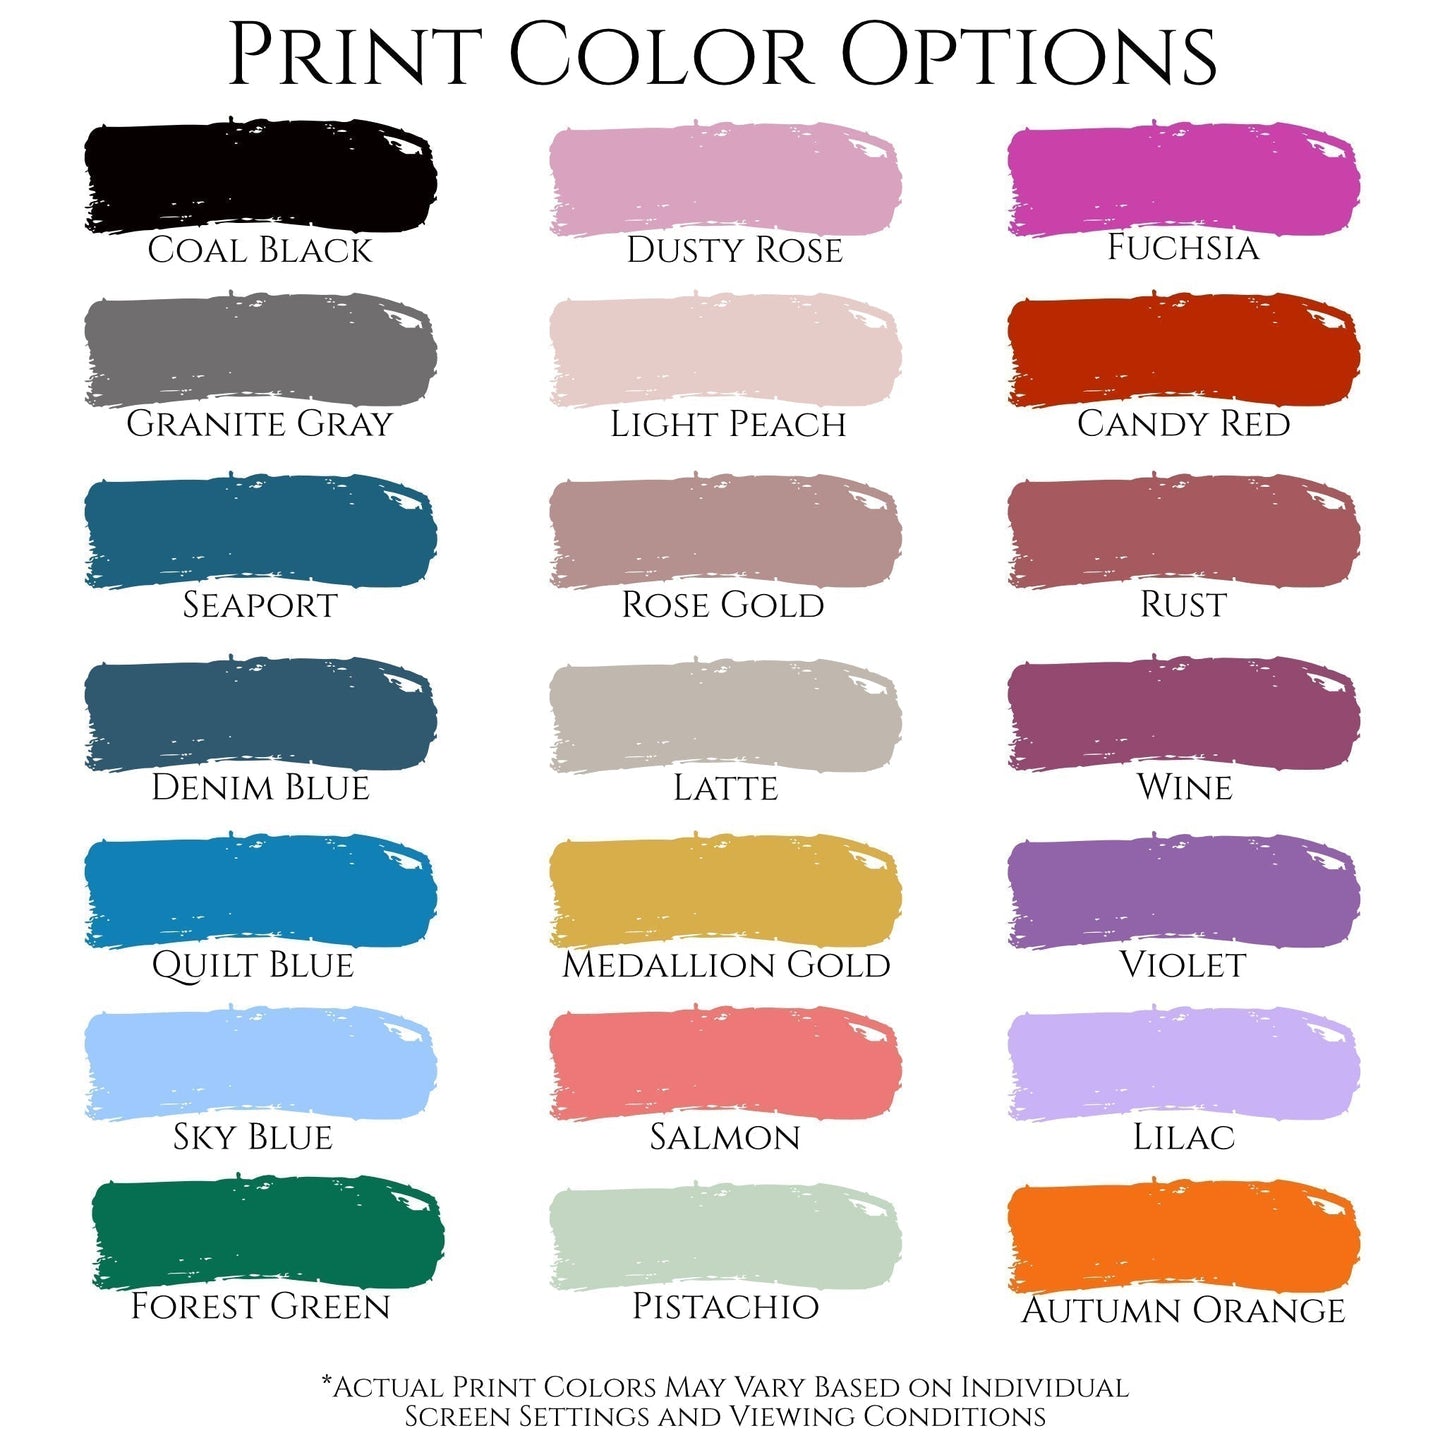 Quilt Fabric, Print Color Options